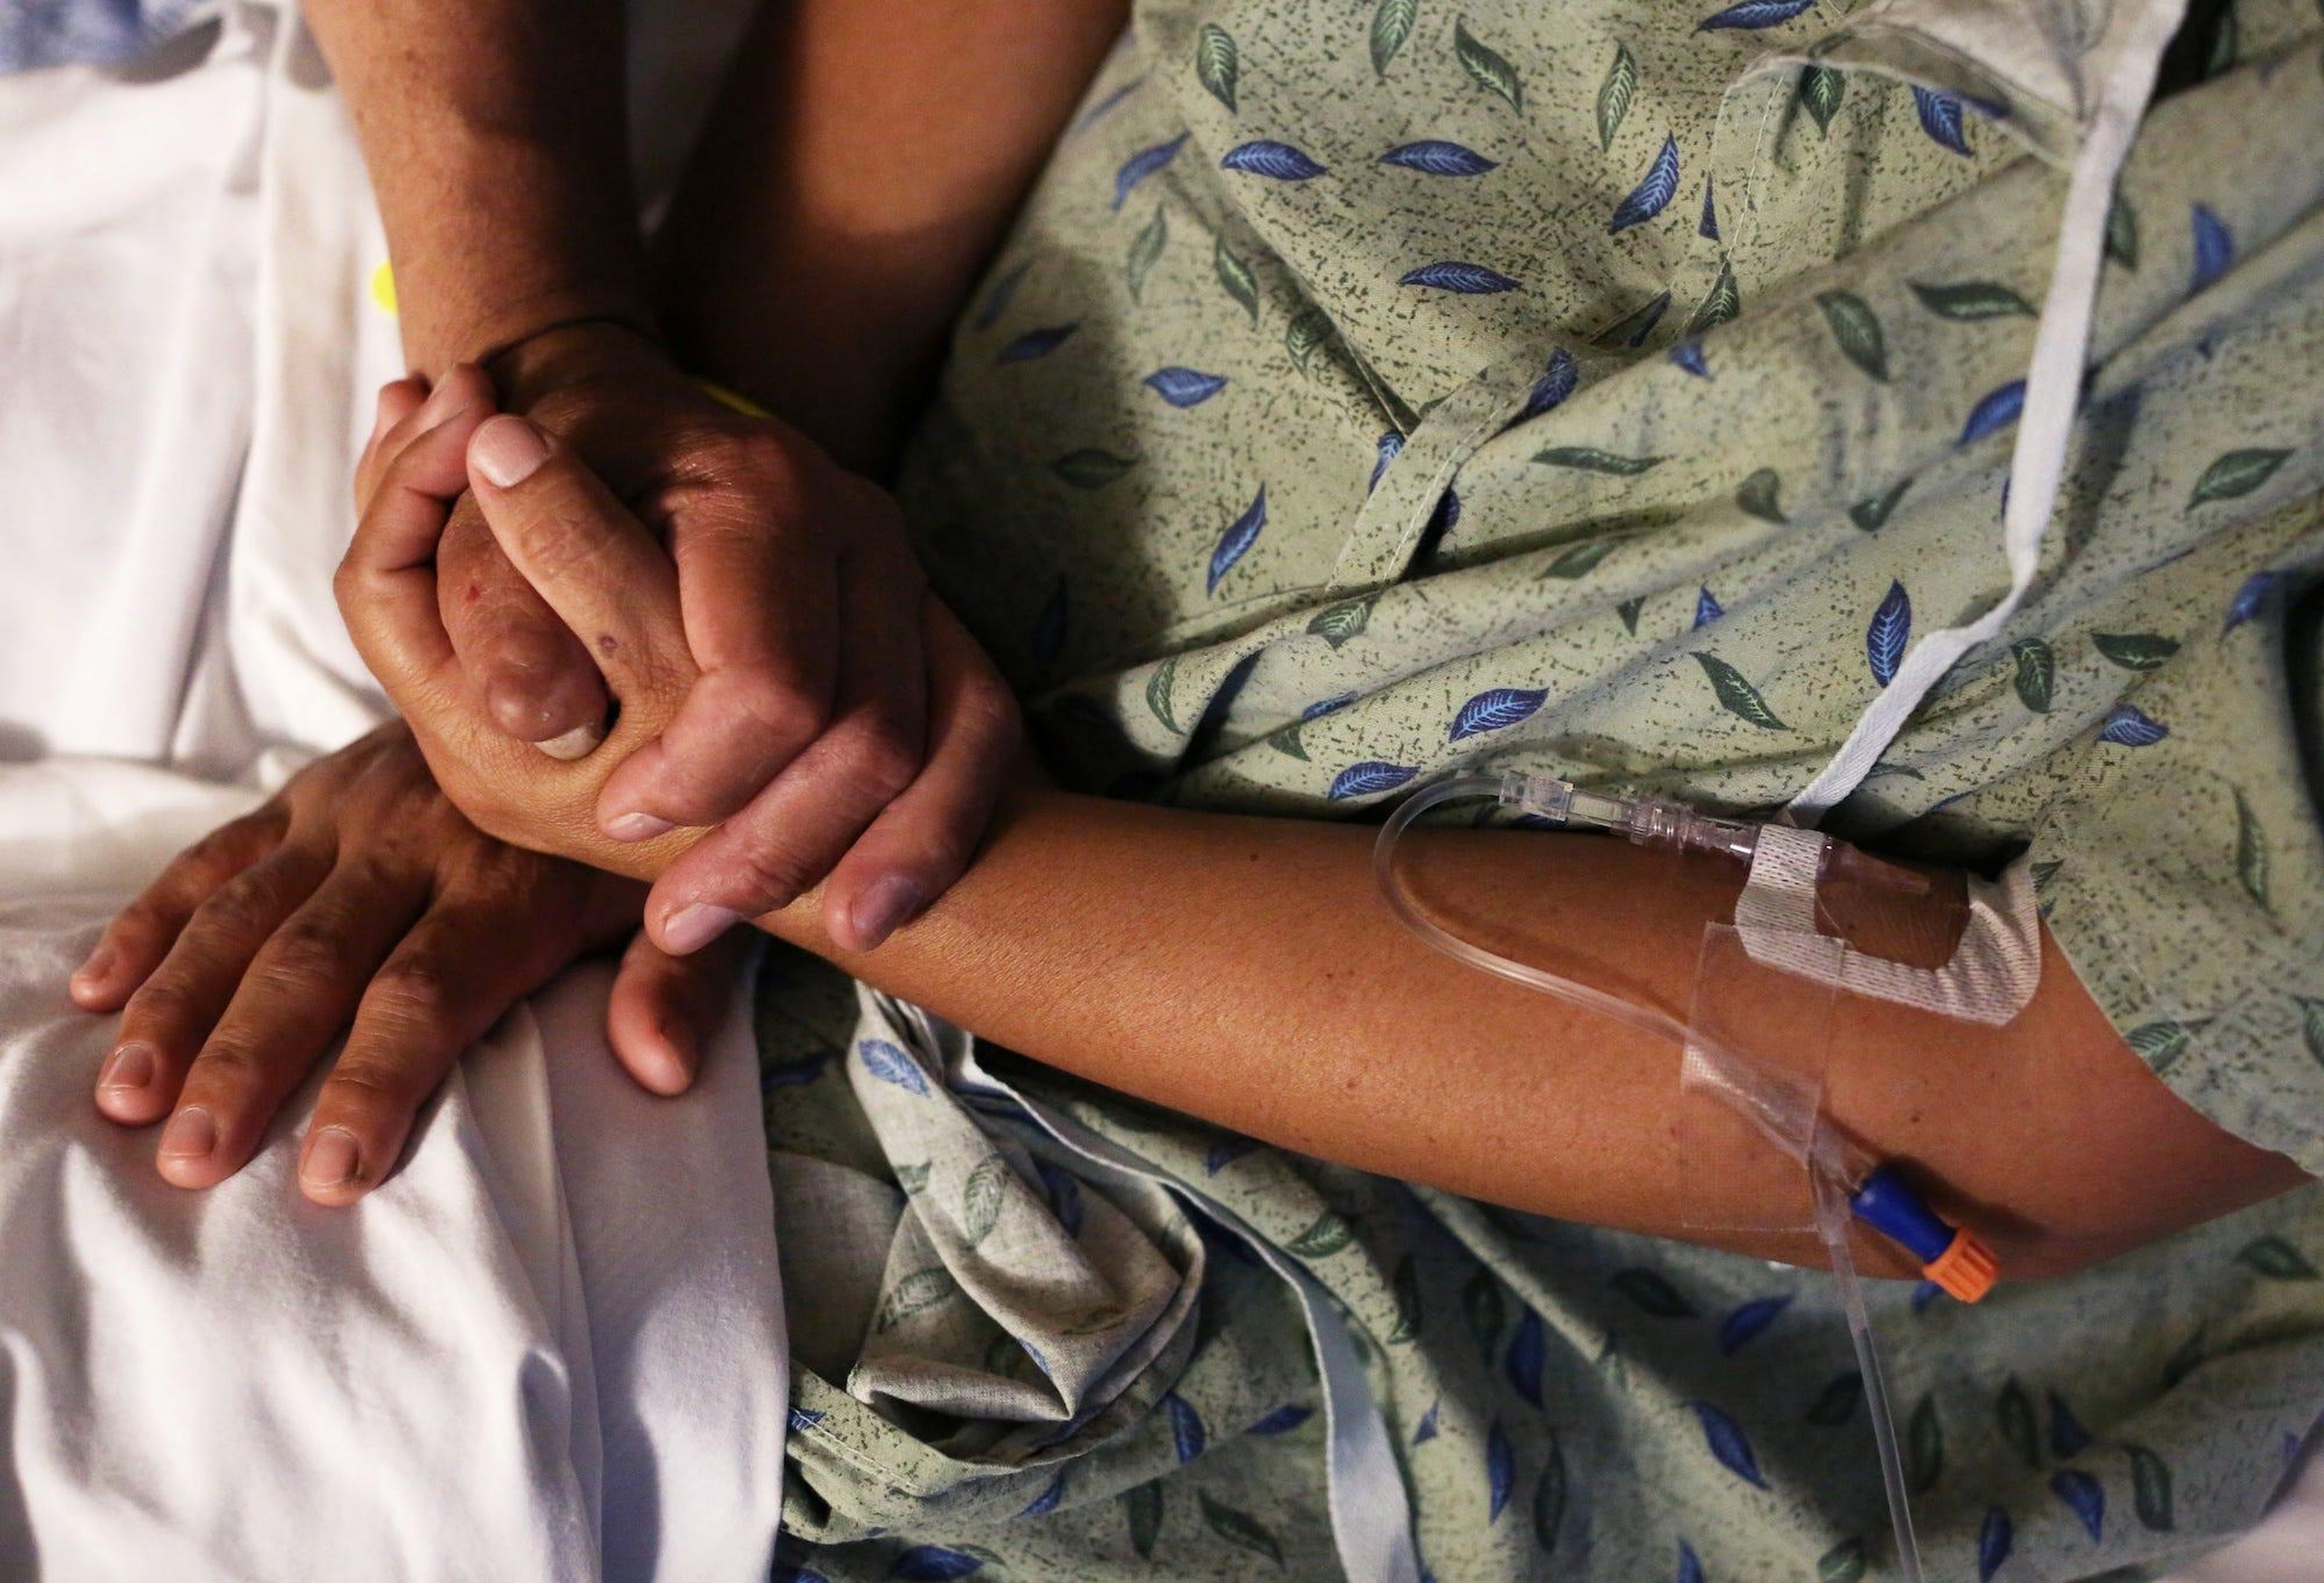 A patient is comforted by her husband at St. Joseph's Hospital in Tucson, Arizona. Caitlin O'Hara/Reuters